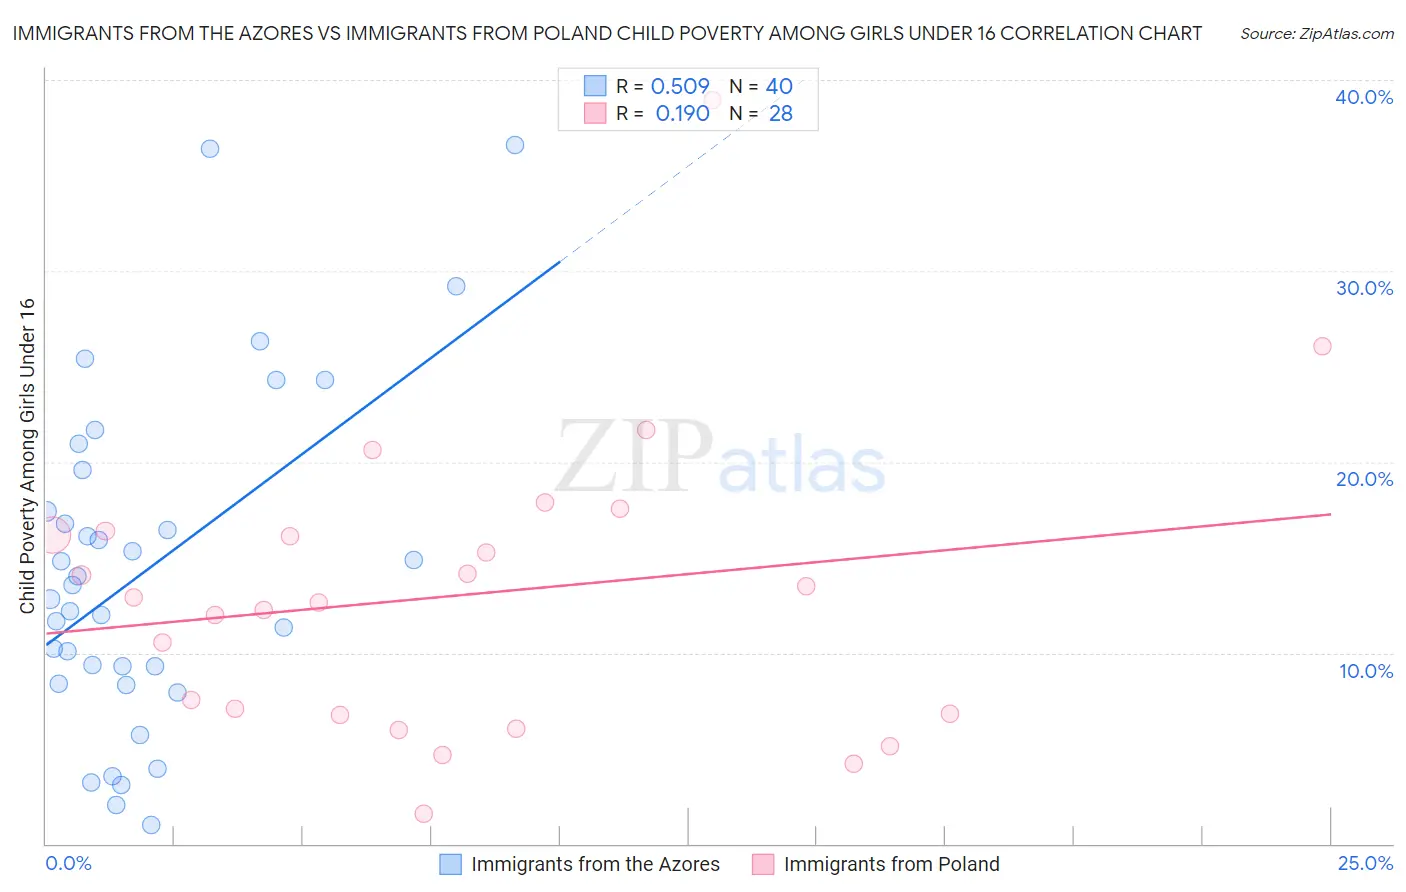 Immigrants from the Azores vs Immigrants from Poland Child Poverty Among Girls Under 16